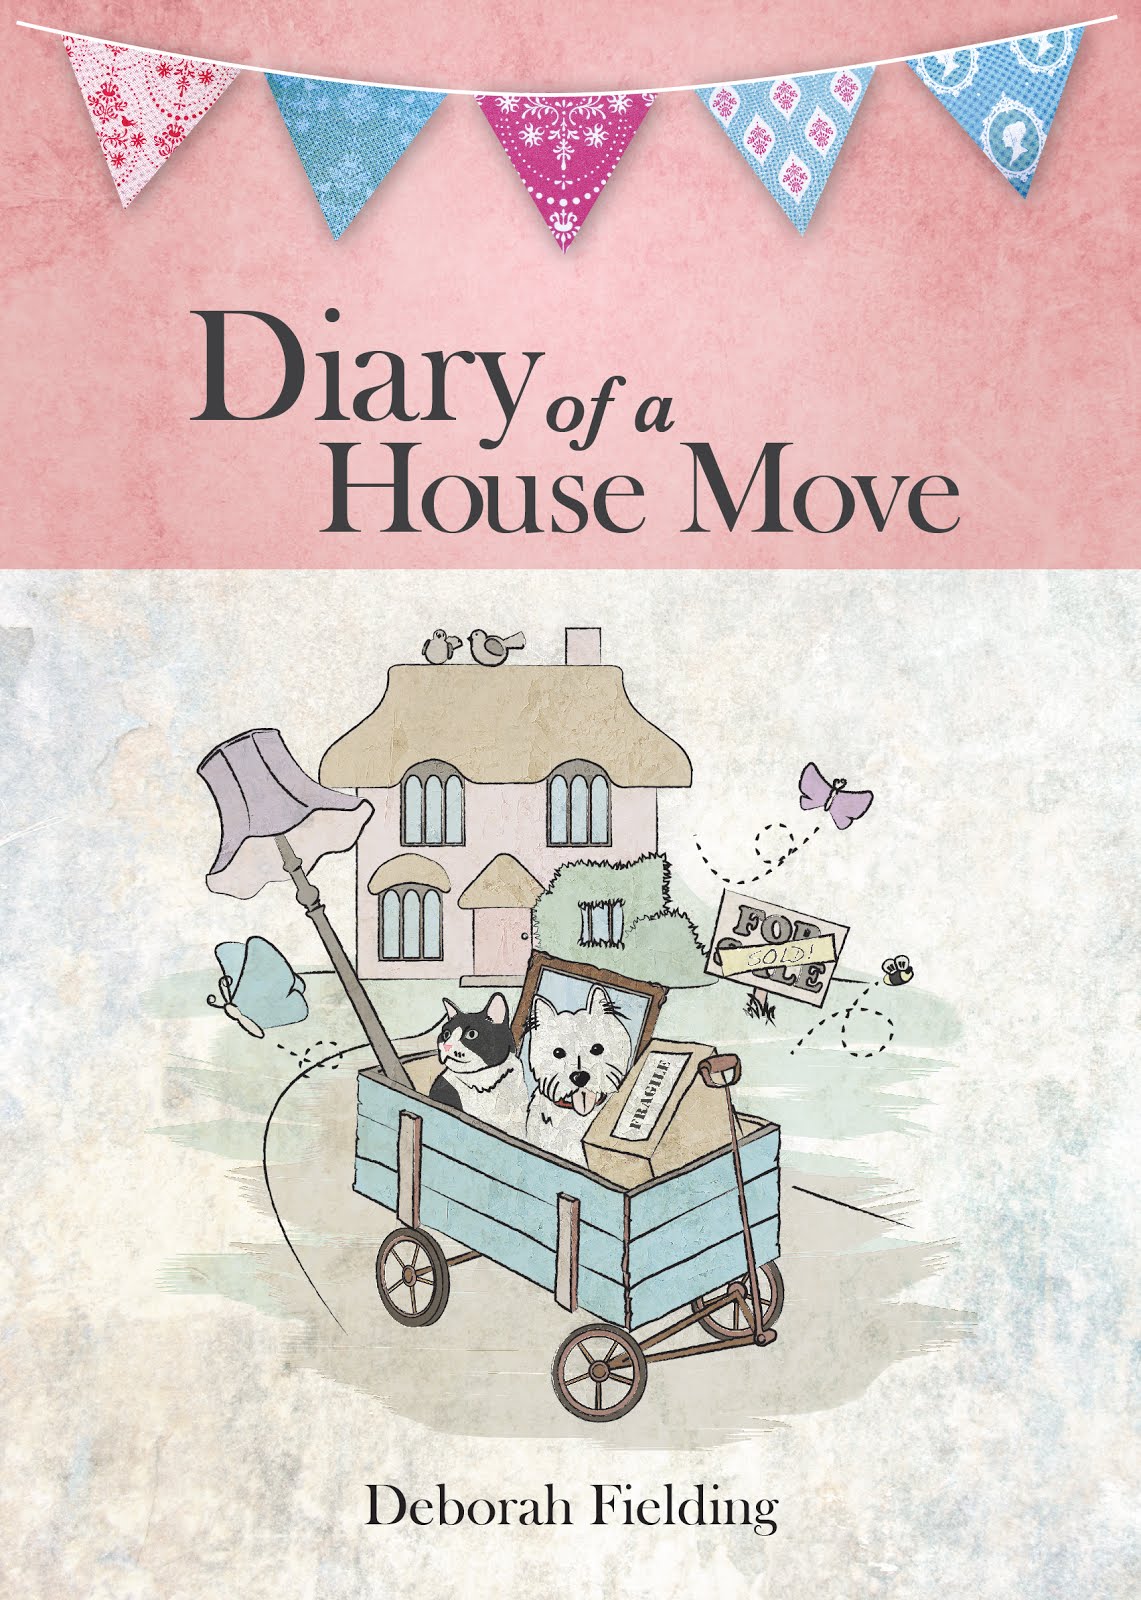 Diary of a House Move